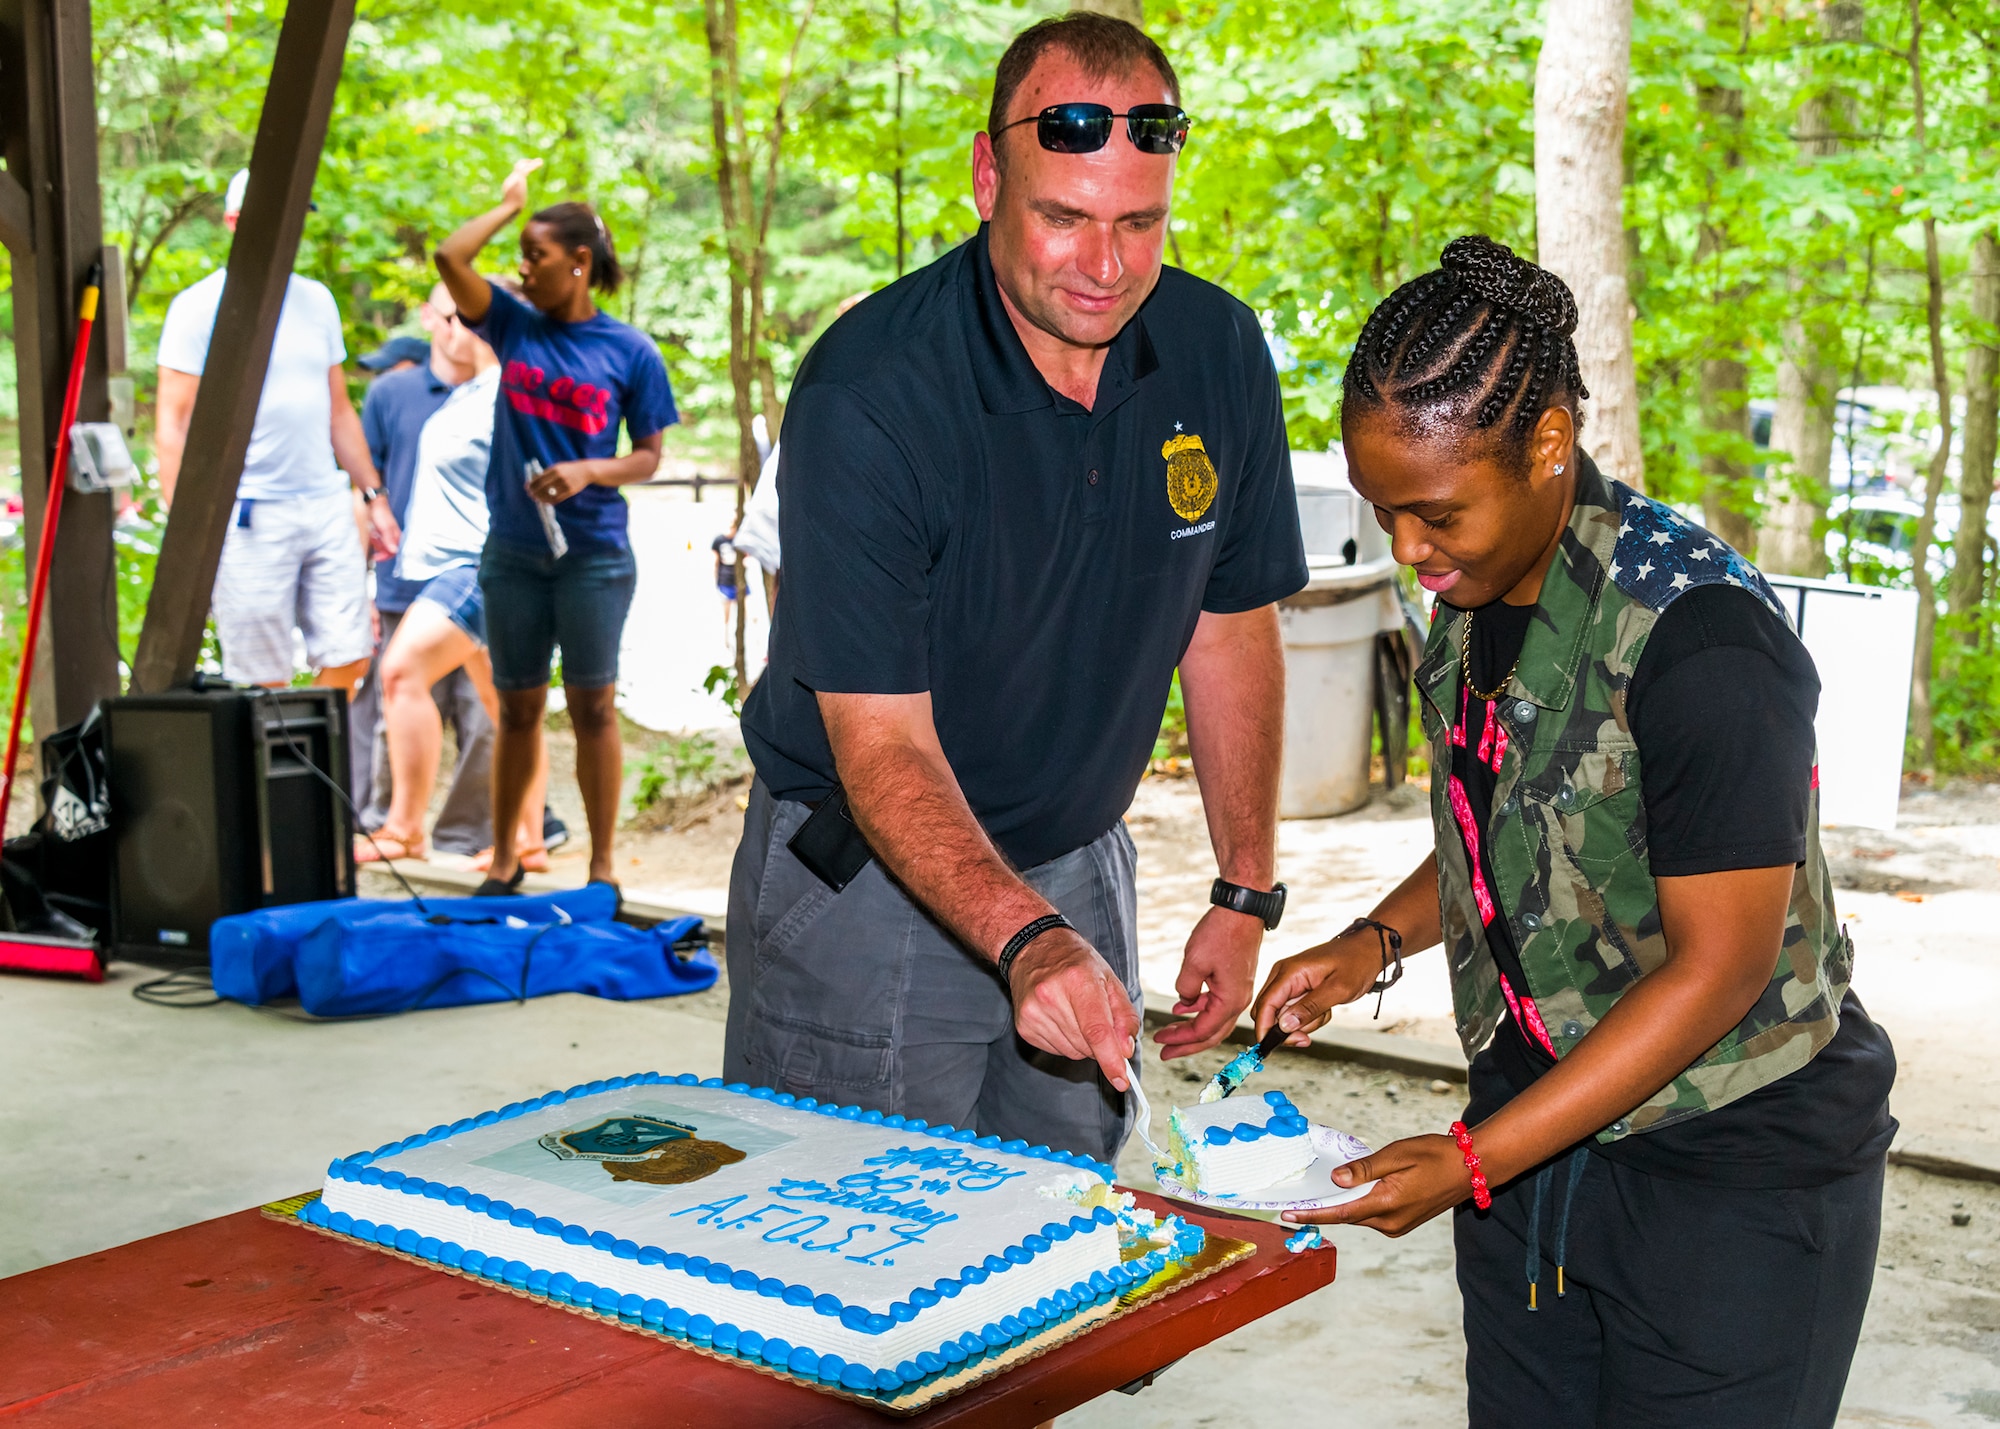 Brig. Gen. Keith Givens, OSI commander, and the youngest OSI member present, Senior Airman LateshaOliver, cut the Birthday cake. (photo by Mike Hastings)